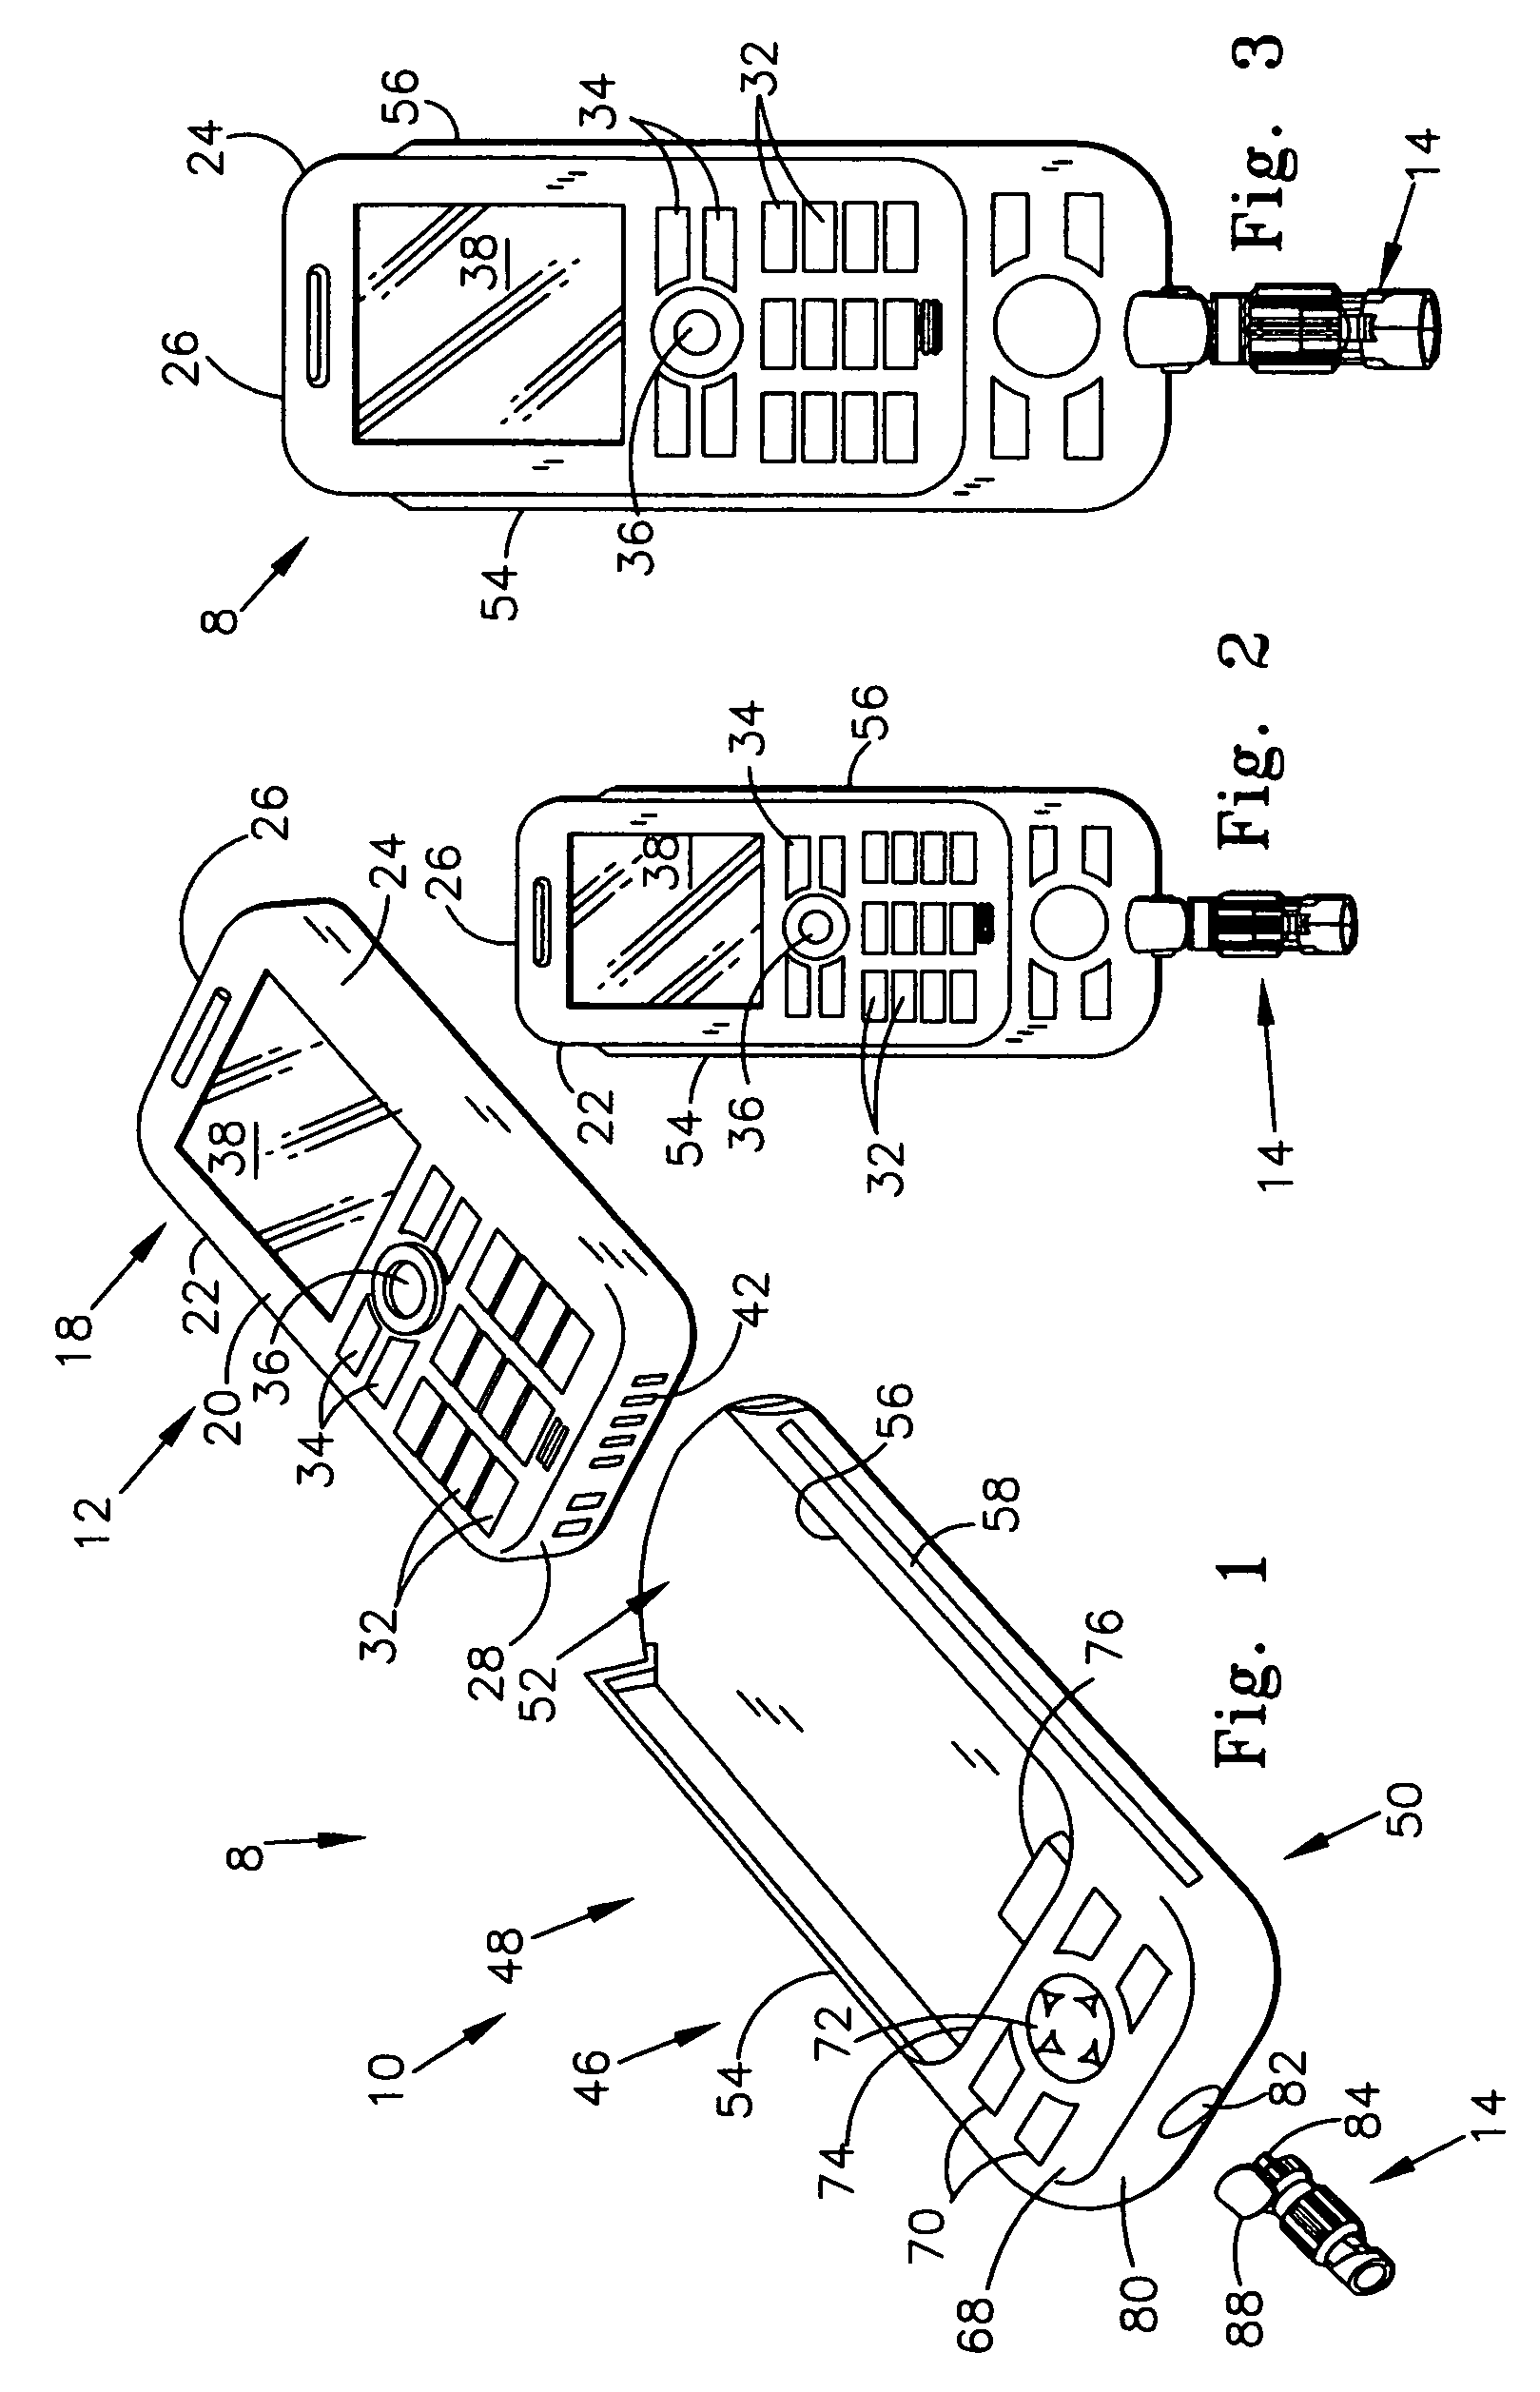 Body fluid testing component for simultaneous analyte detection